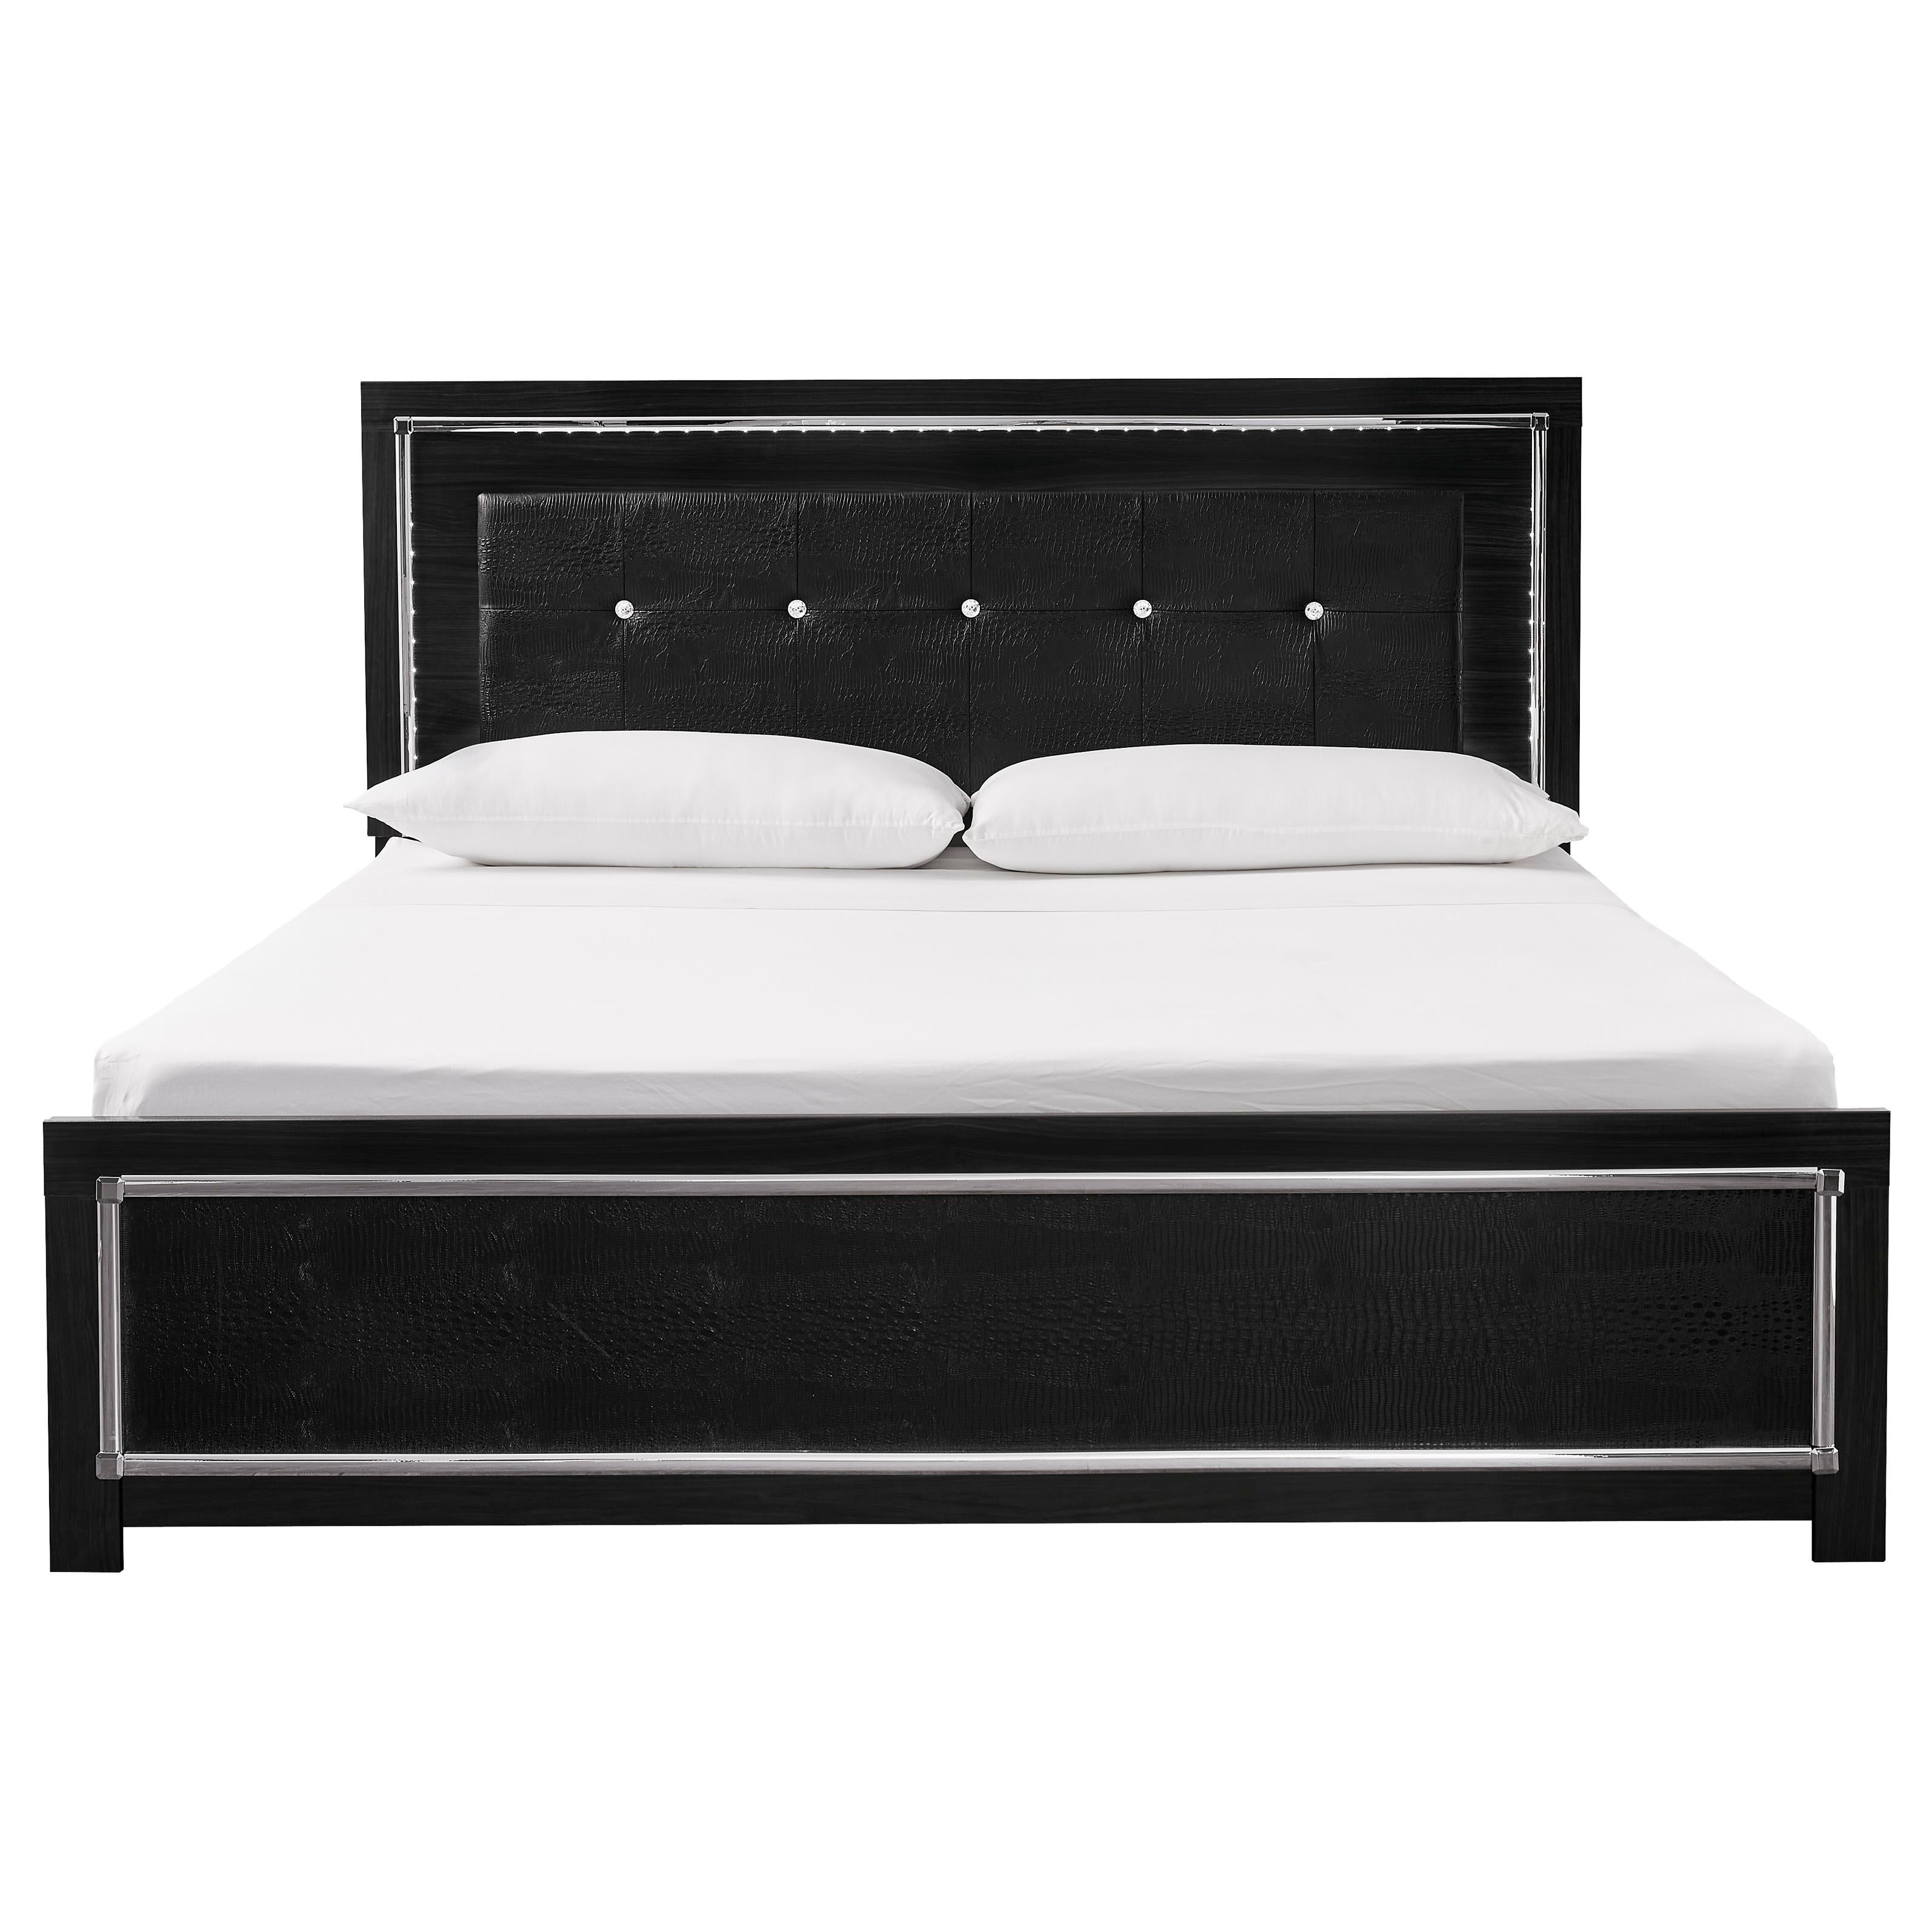 Signature Design by Ashley Kaydell King Upholstered Panel Bed B1420-58/B1420-56/B1420-97